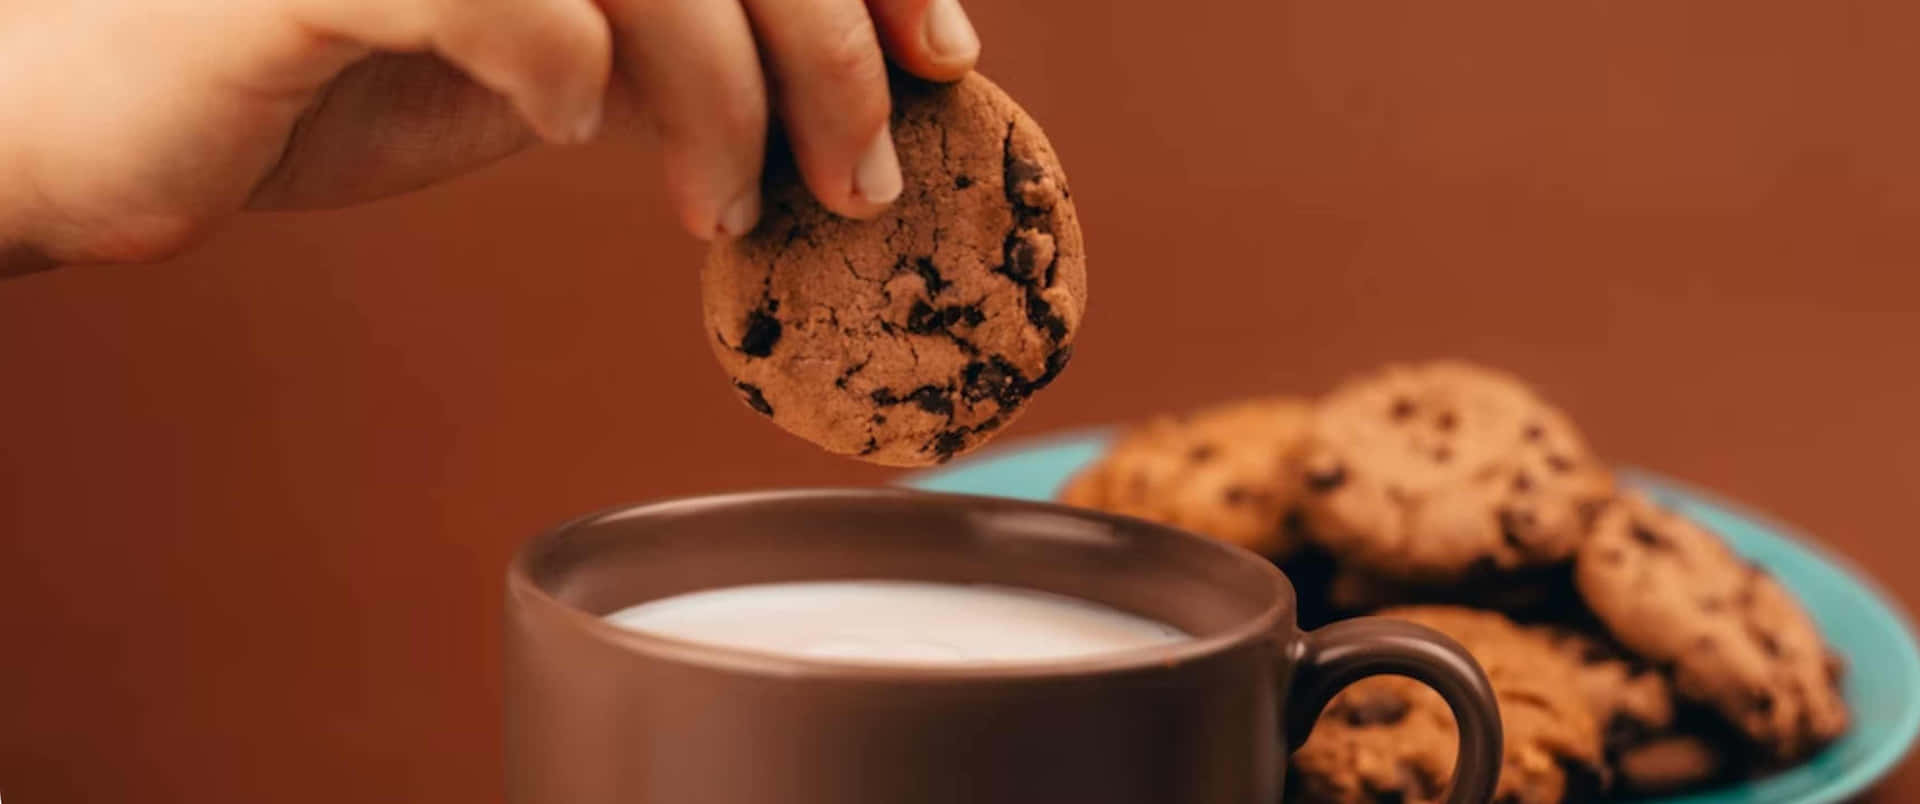 Delicious Chocolate Deep 3440x1440p Cookies Background